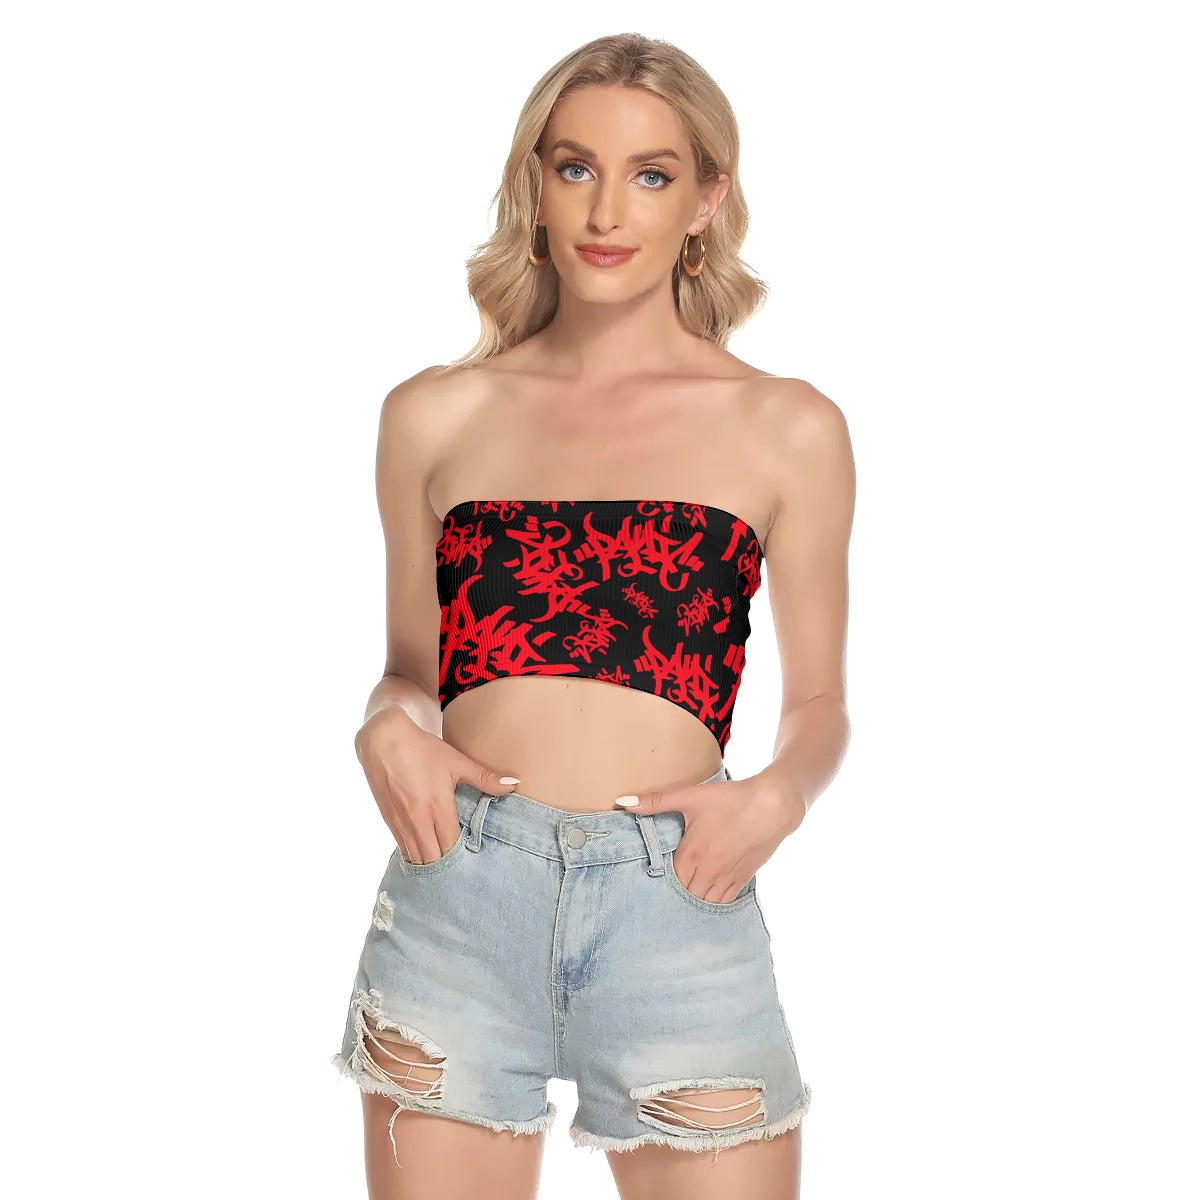 THE TAG TUBE TOP IN BLACK/RED - Panic 39